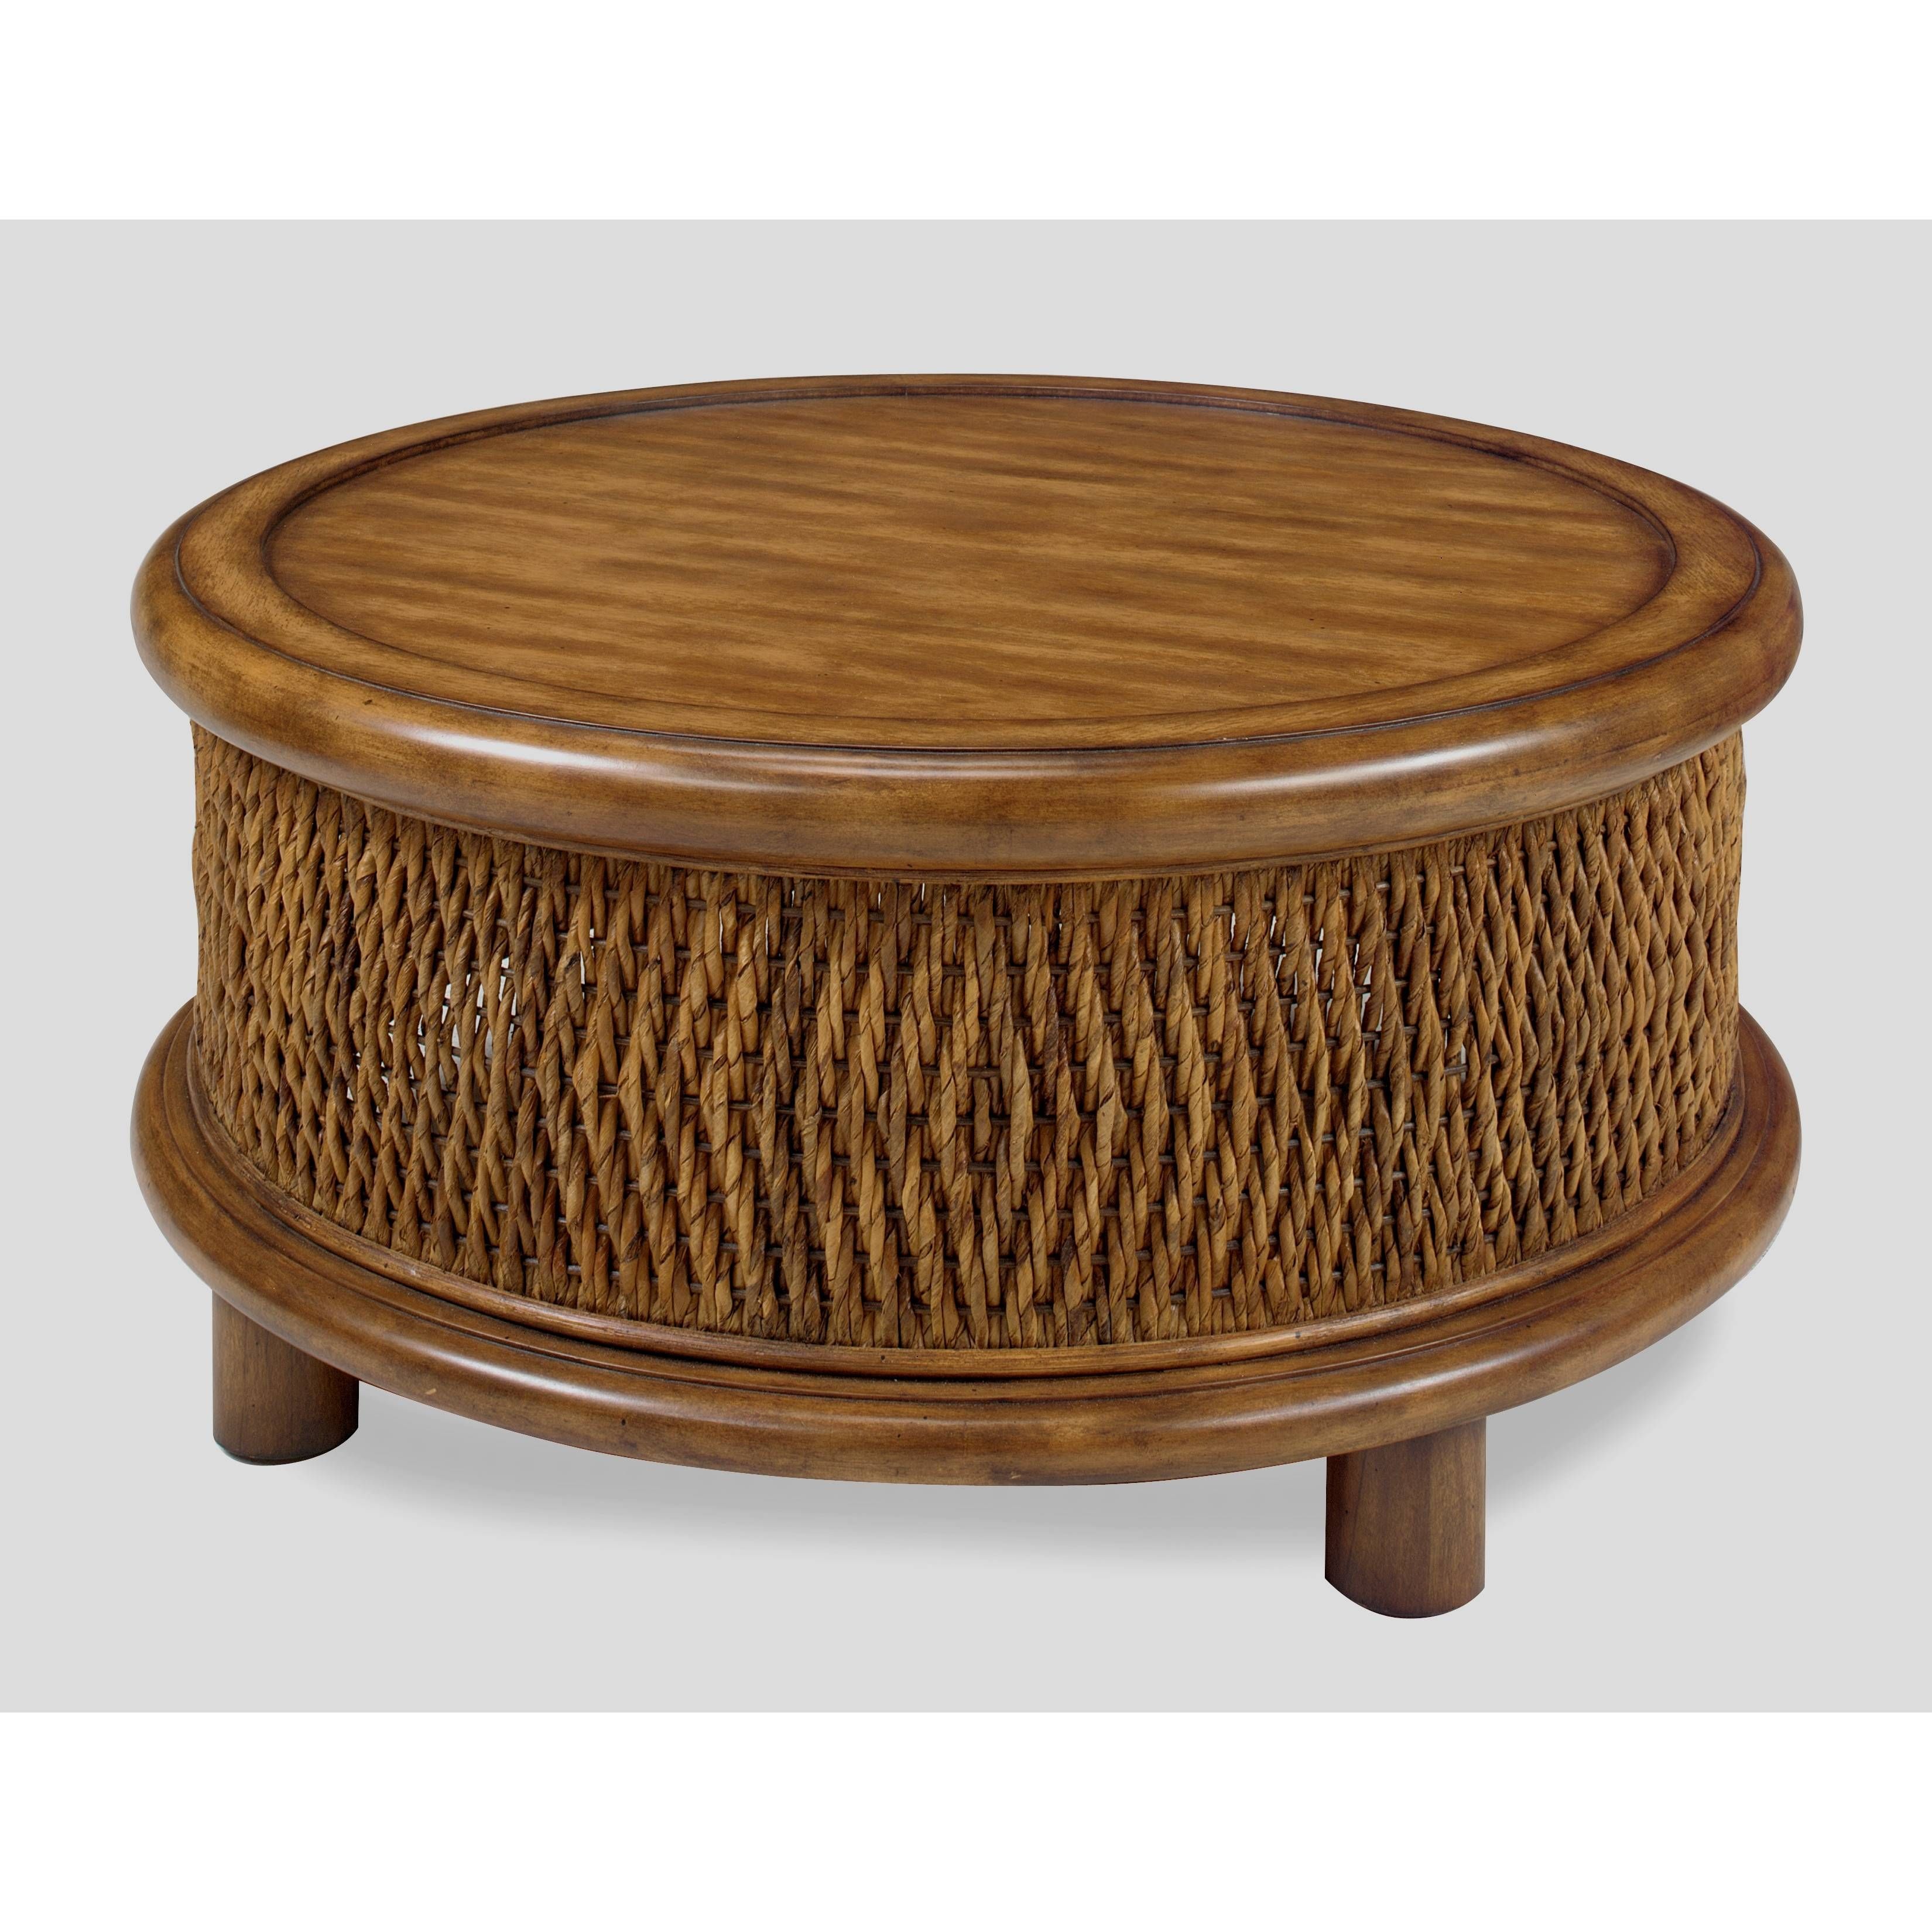 Deco Oak Round Two Tier Coffee Table 2 3392 Pg Round Coffee Tables Regarding Round Woven Coffee Tables (View 19 of 30)